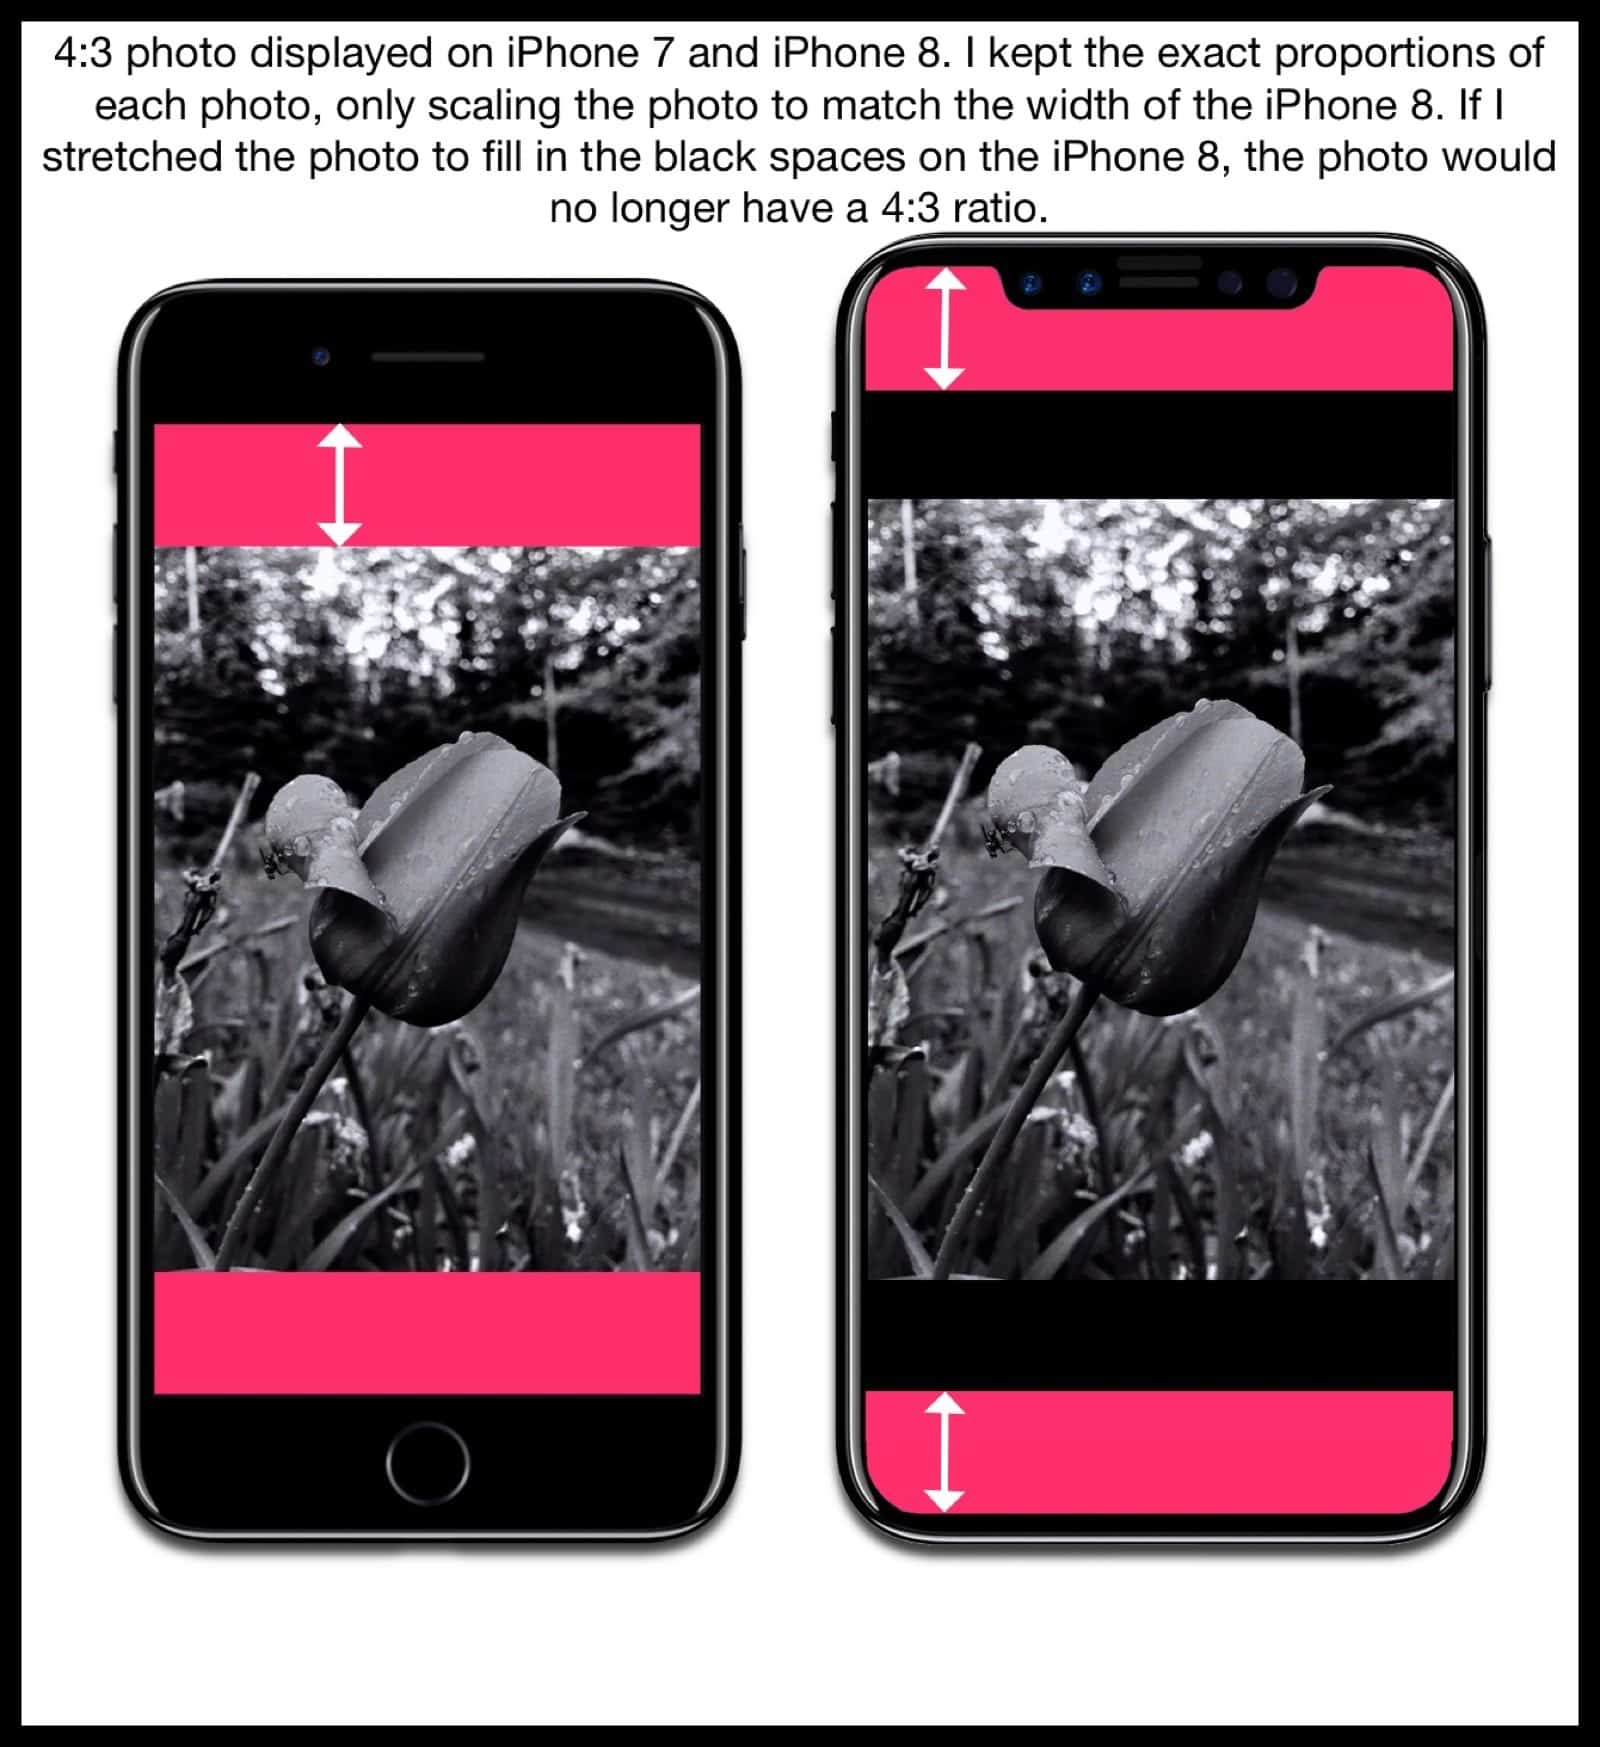 Image comparing how the iPhone 7 and iPhone 8 mockup displays photos with a 4:3 aspect ratio. 